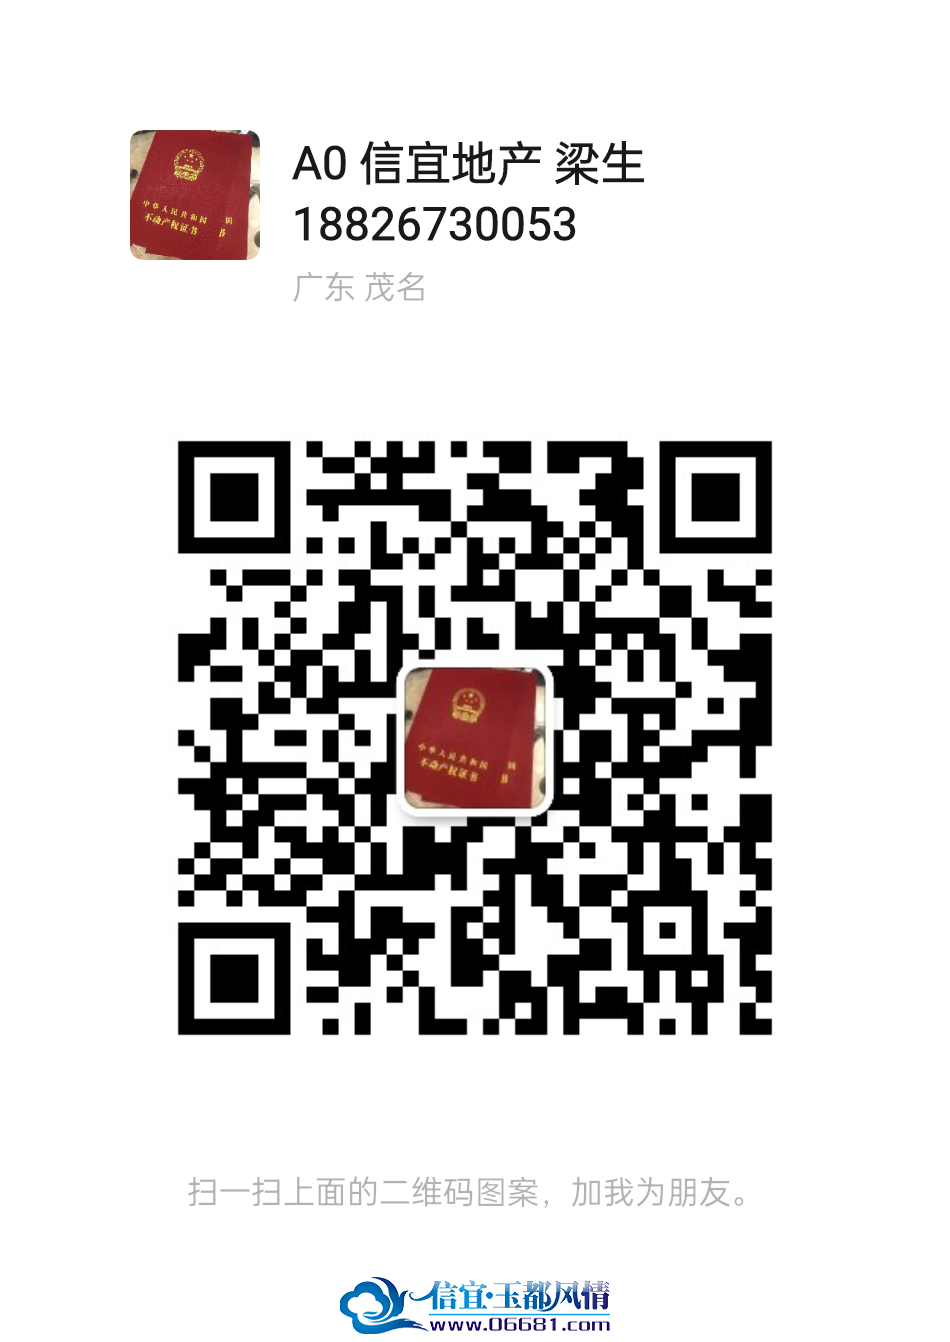 mmqrcode1712887872023.png